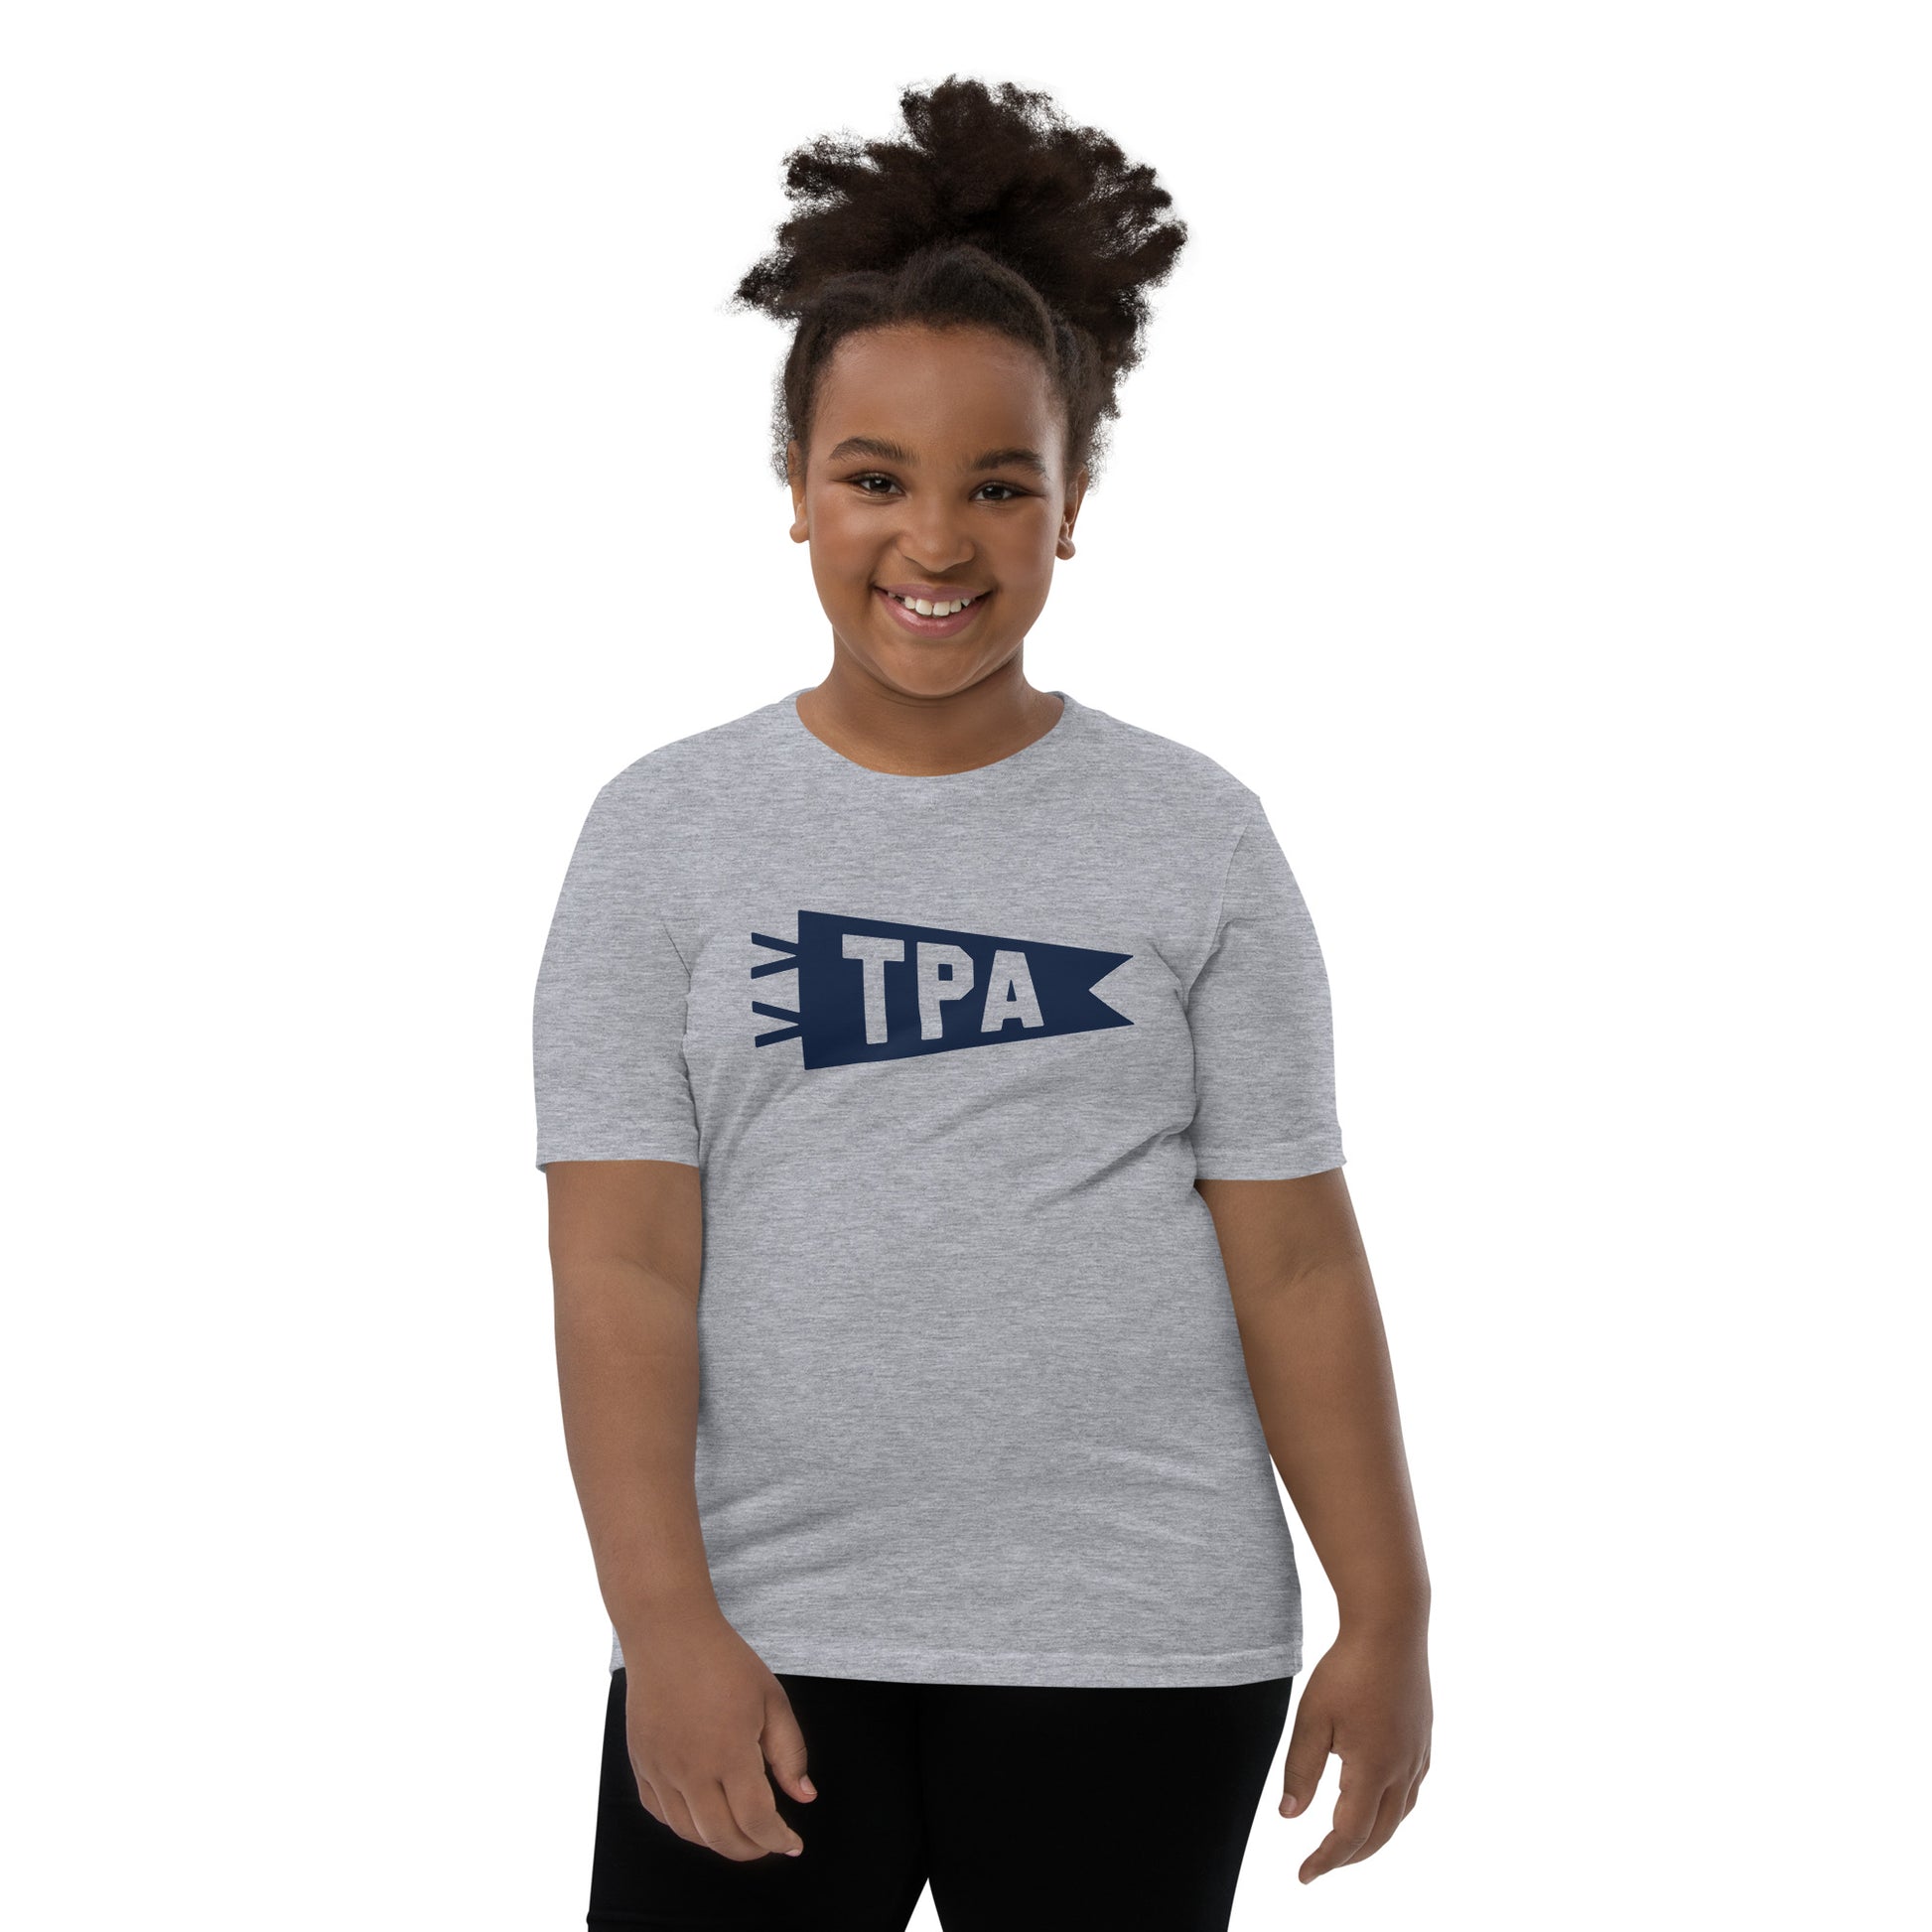 Kid's Airport Code Tee - Navy Blue Graphic • TPA Tampa • YHM Designs - Image 05